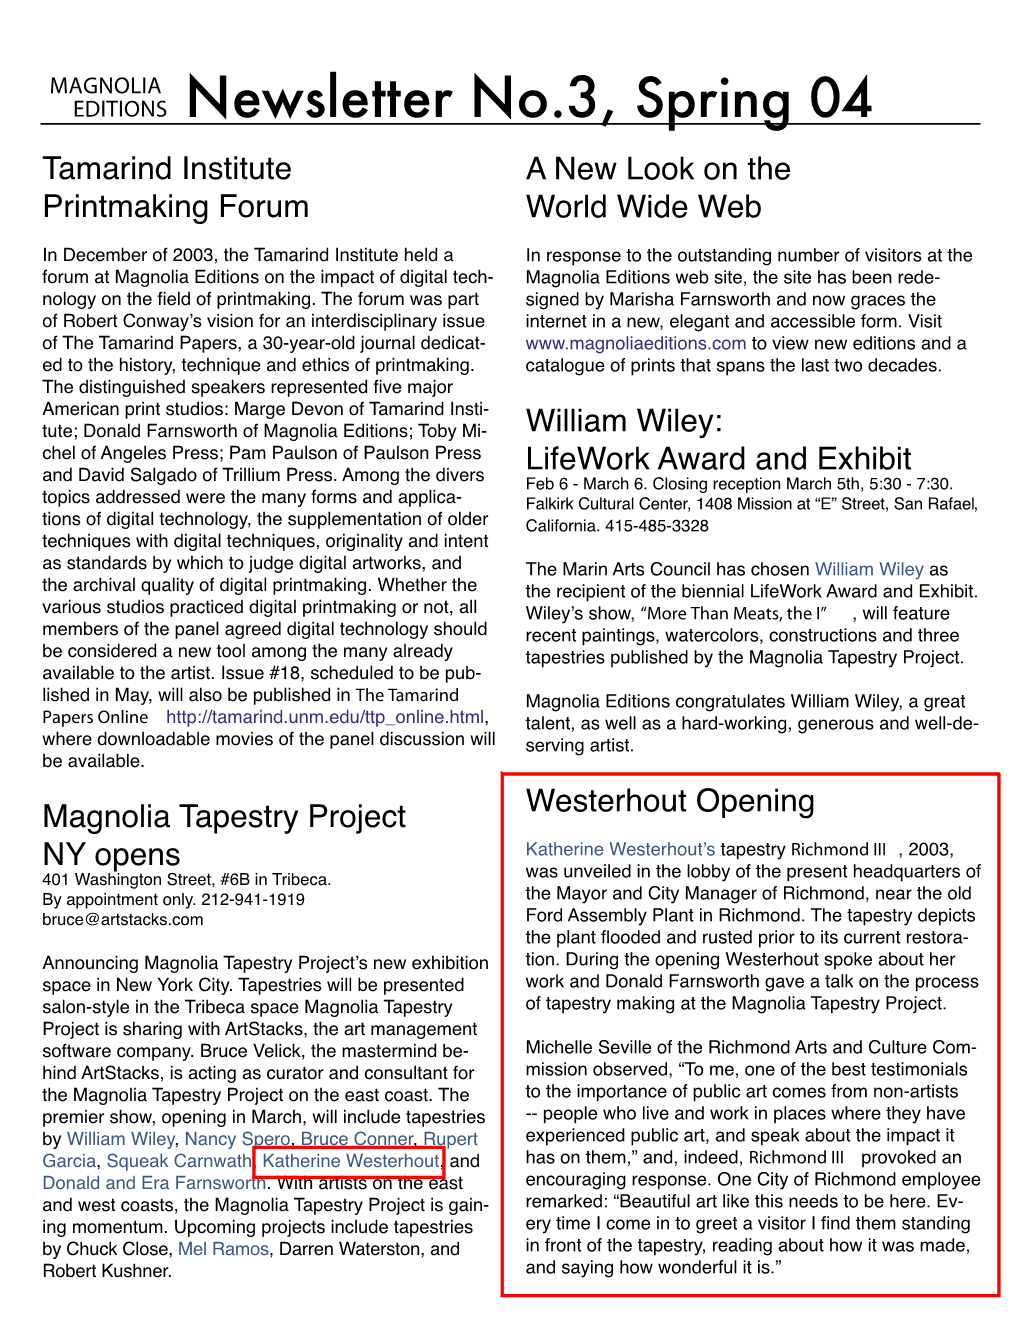 EDITIONS Newsletter No.3, Spring 04 Tamarind Institute a New Look on the Printmaking Forum World Wide Web